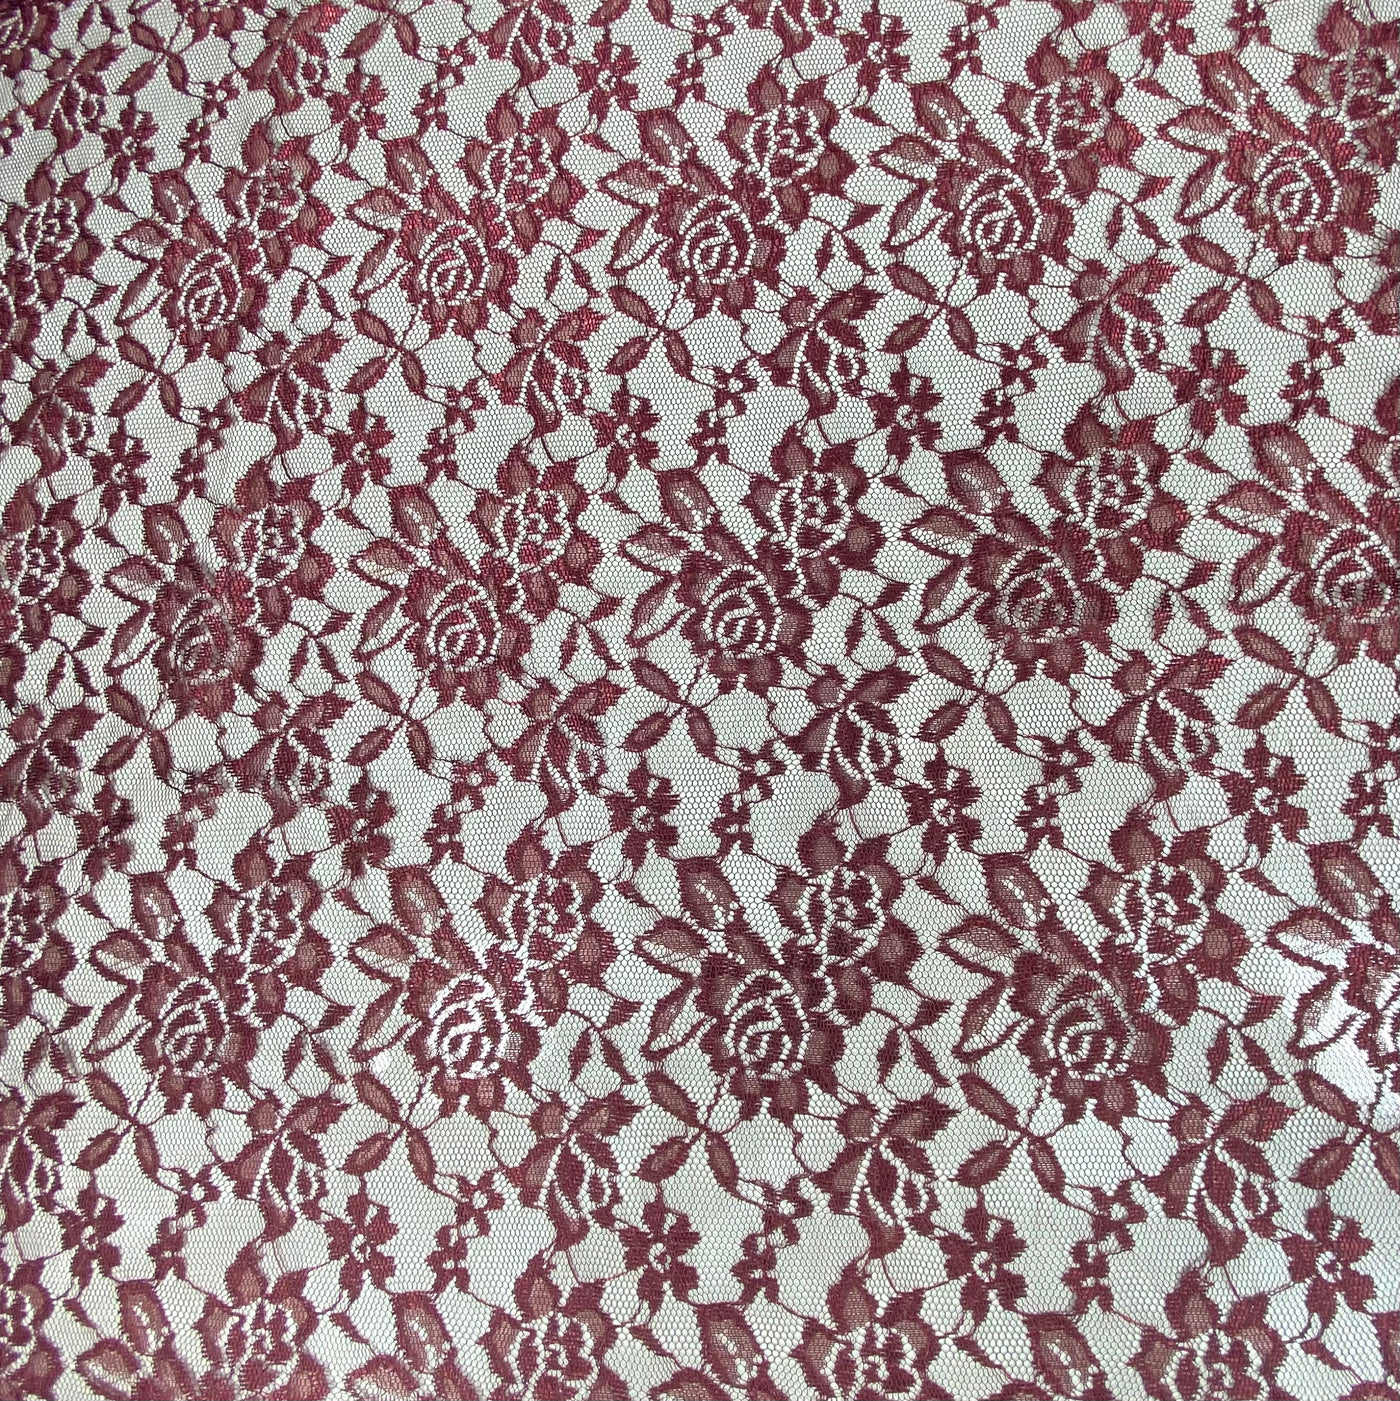 Floral Embroidered Lace with Finished Edges - Burgundy